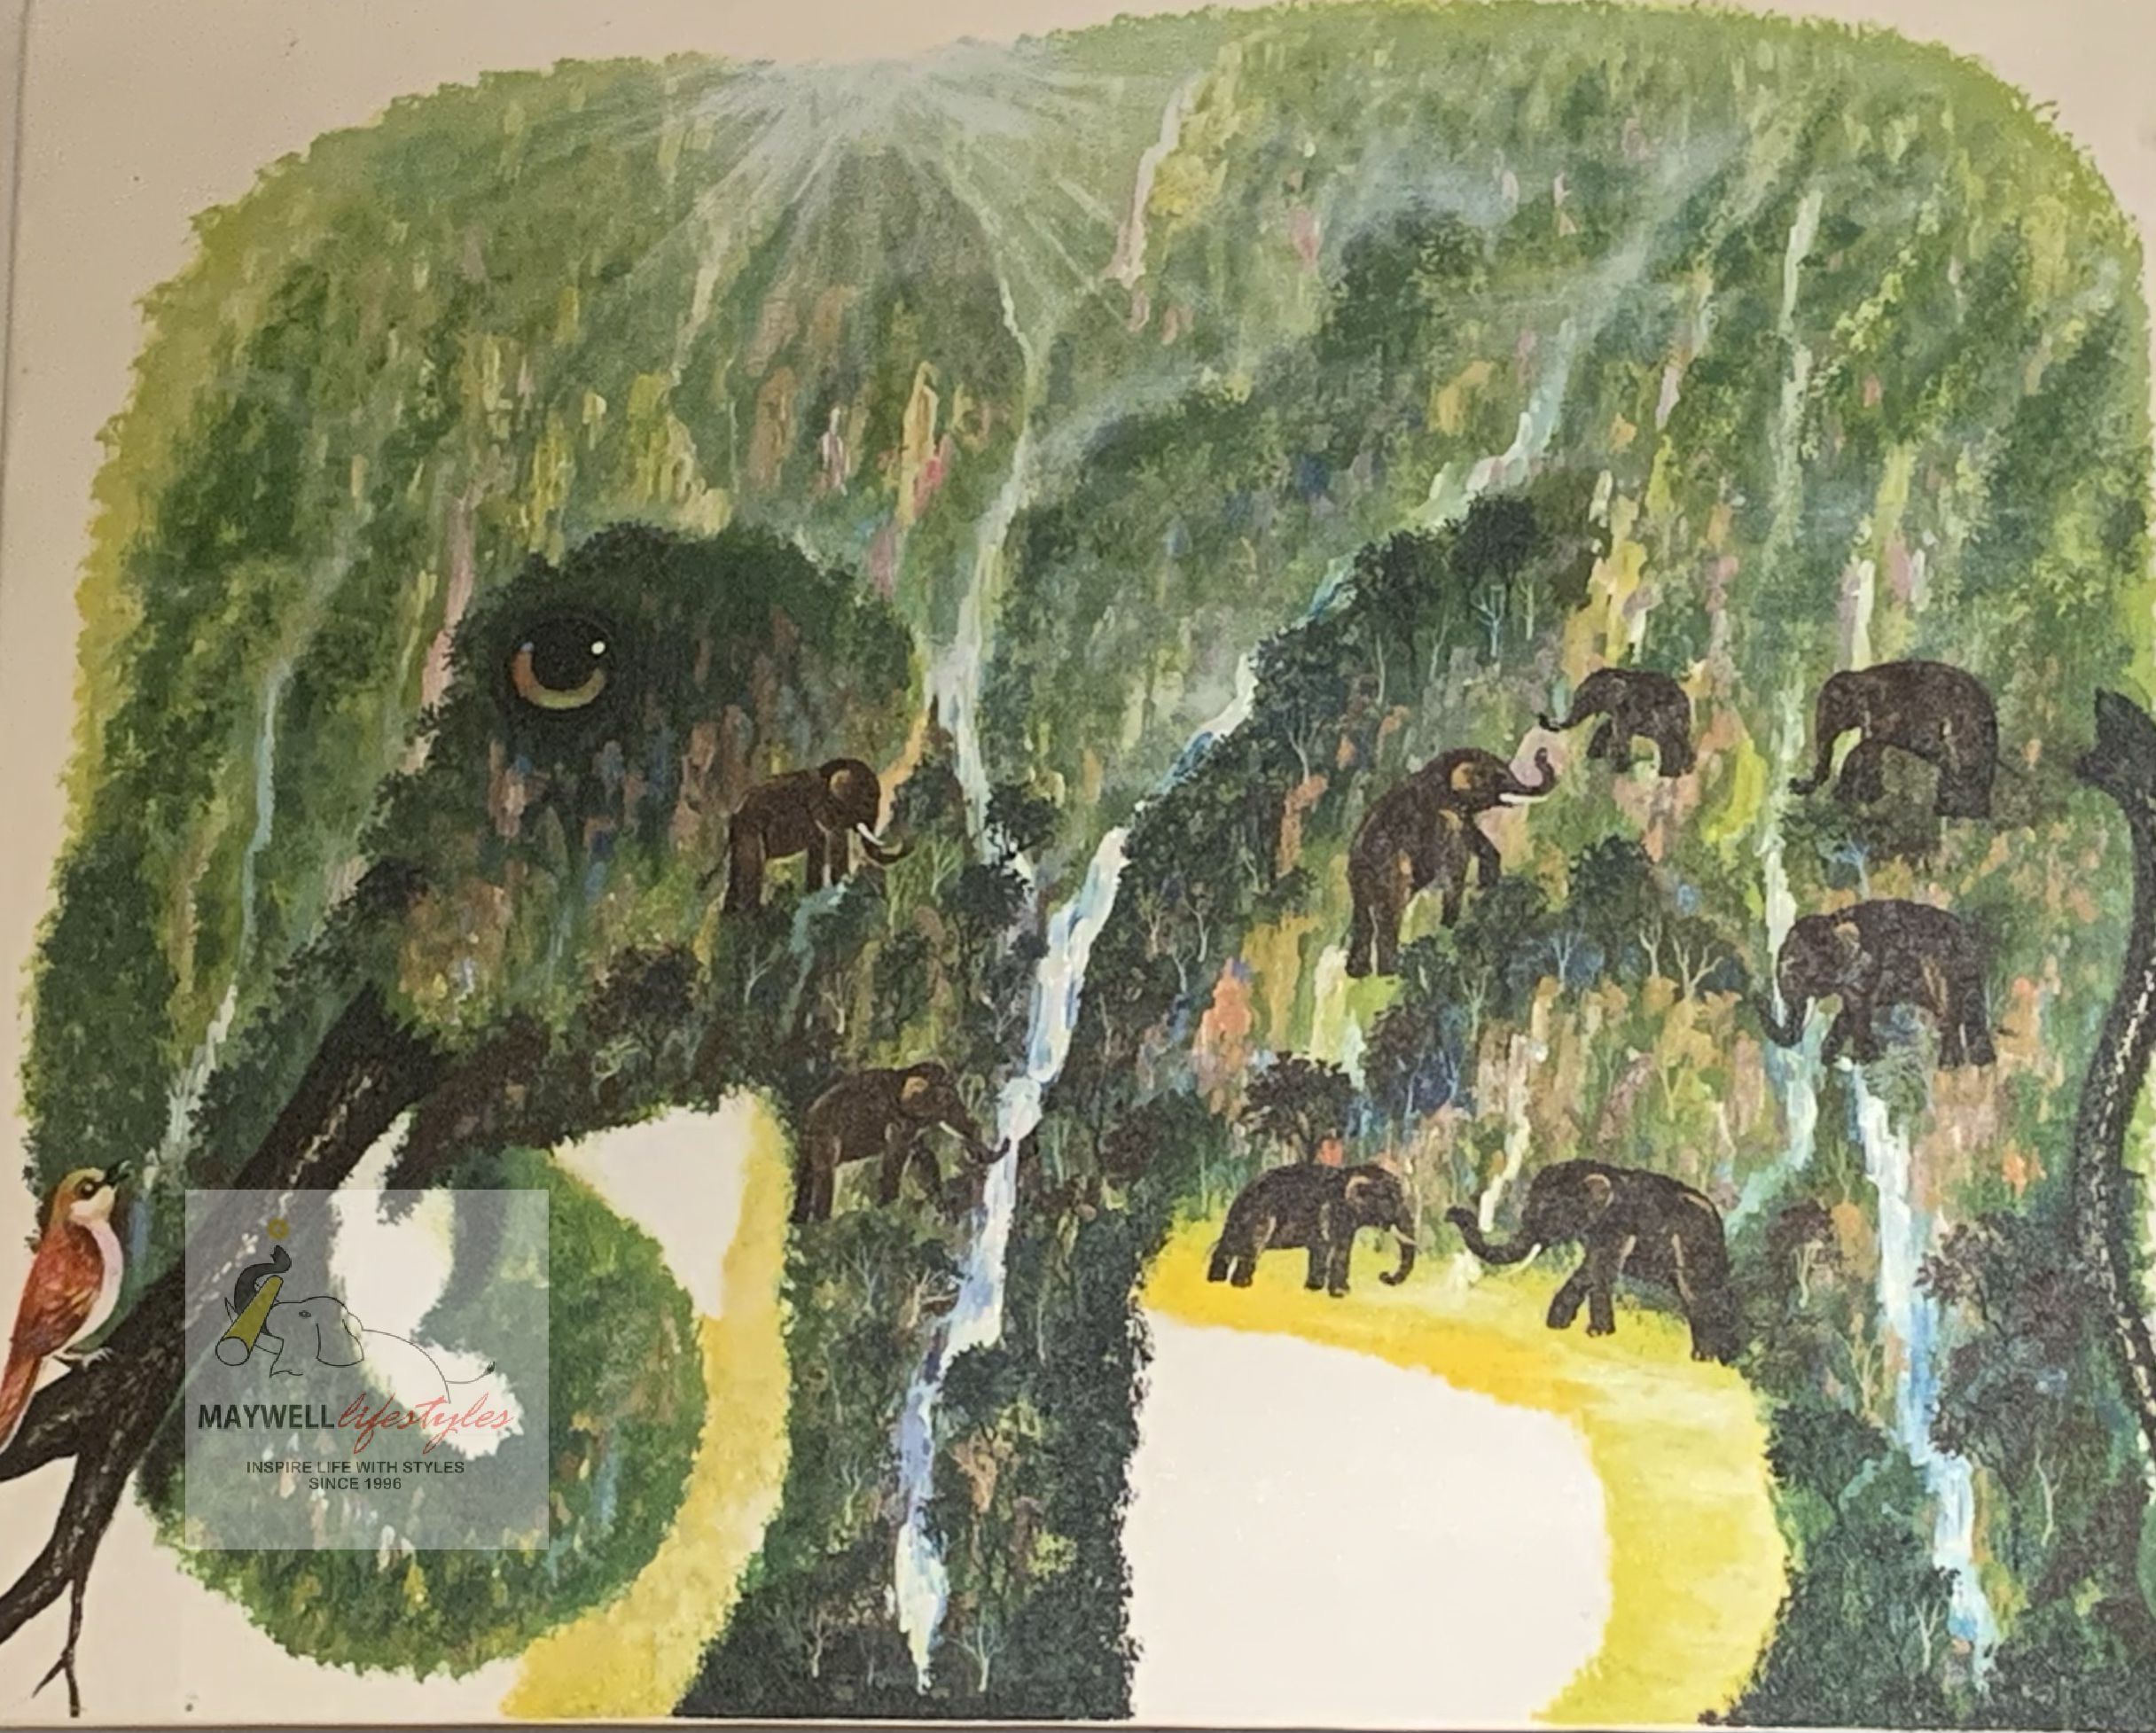 ELEPHANT IN THE FOREST